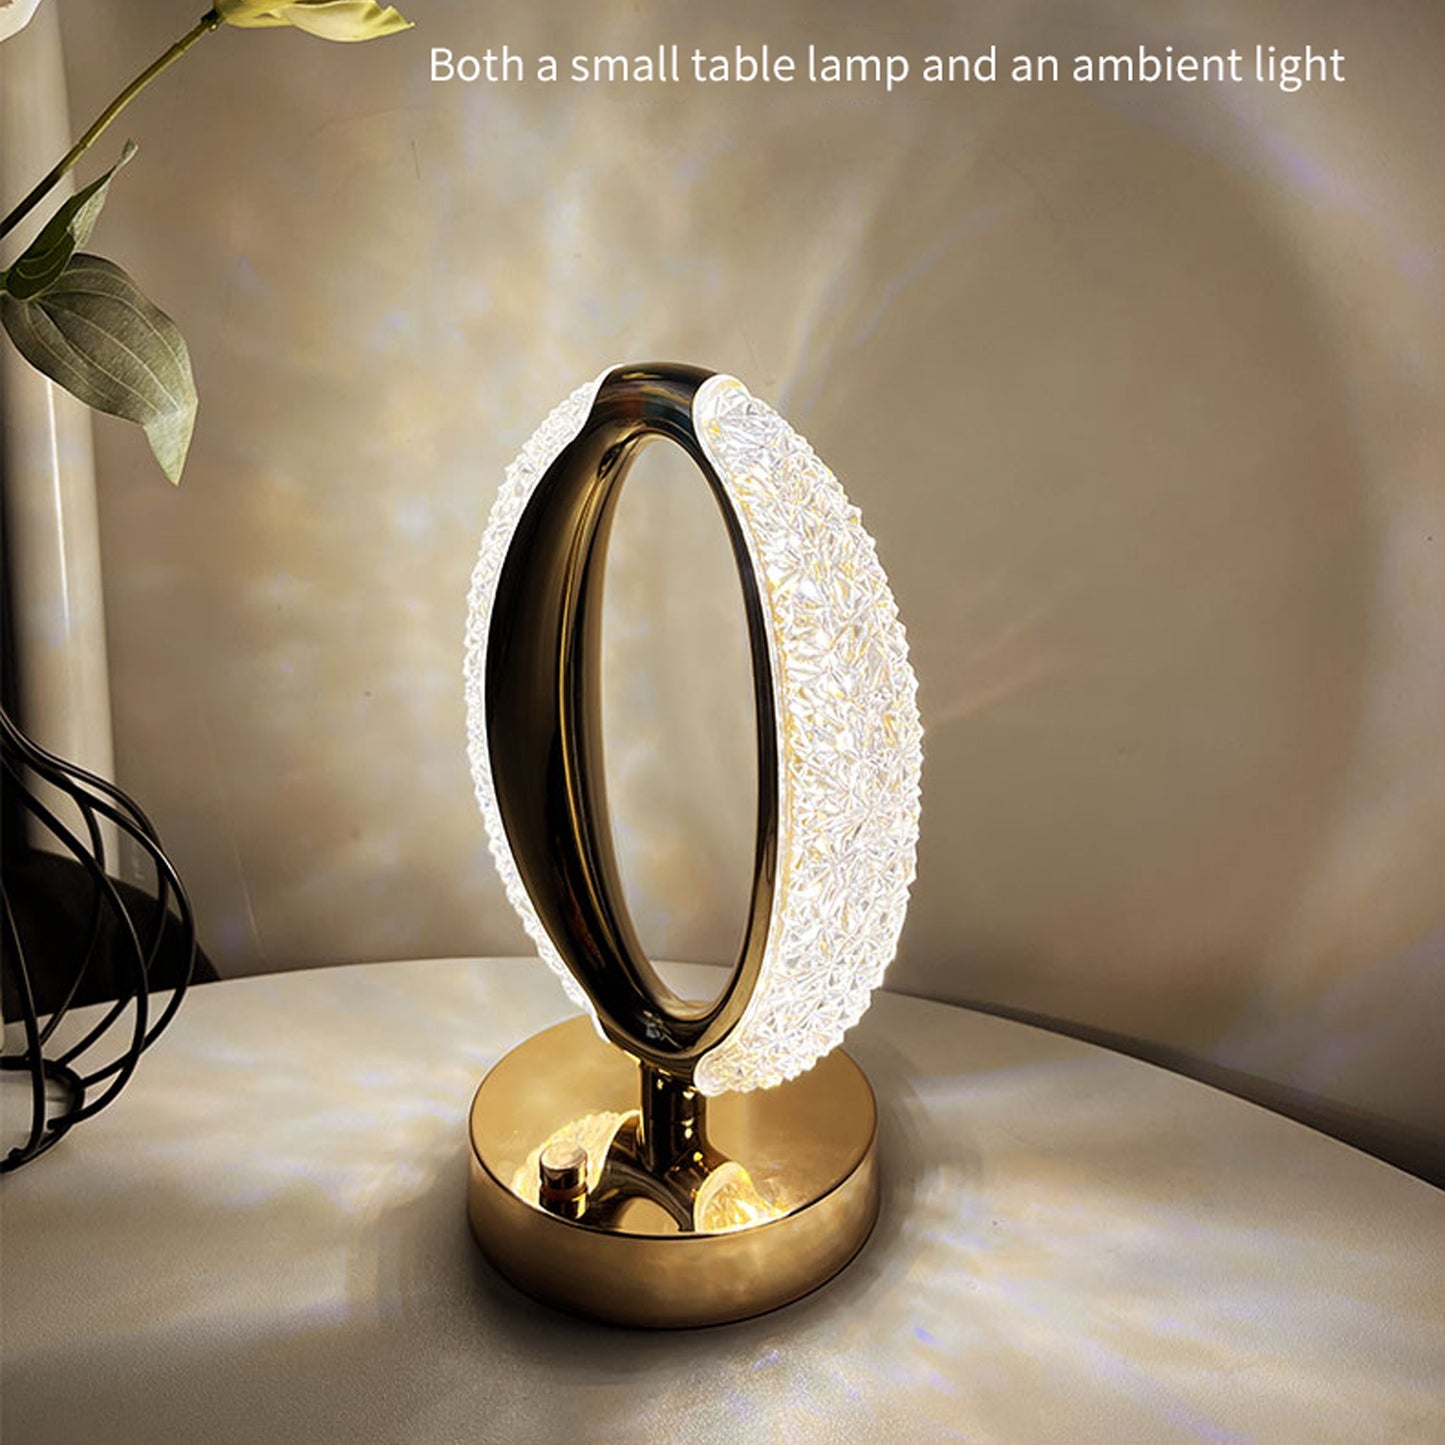 Oval Shape Crystal Lamp USB Rechargeable, 3-Way Dimmable Touch Control Diamond Nightstand Lamp for home, Bedroom, Living, Room, Party, Restaurant